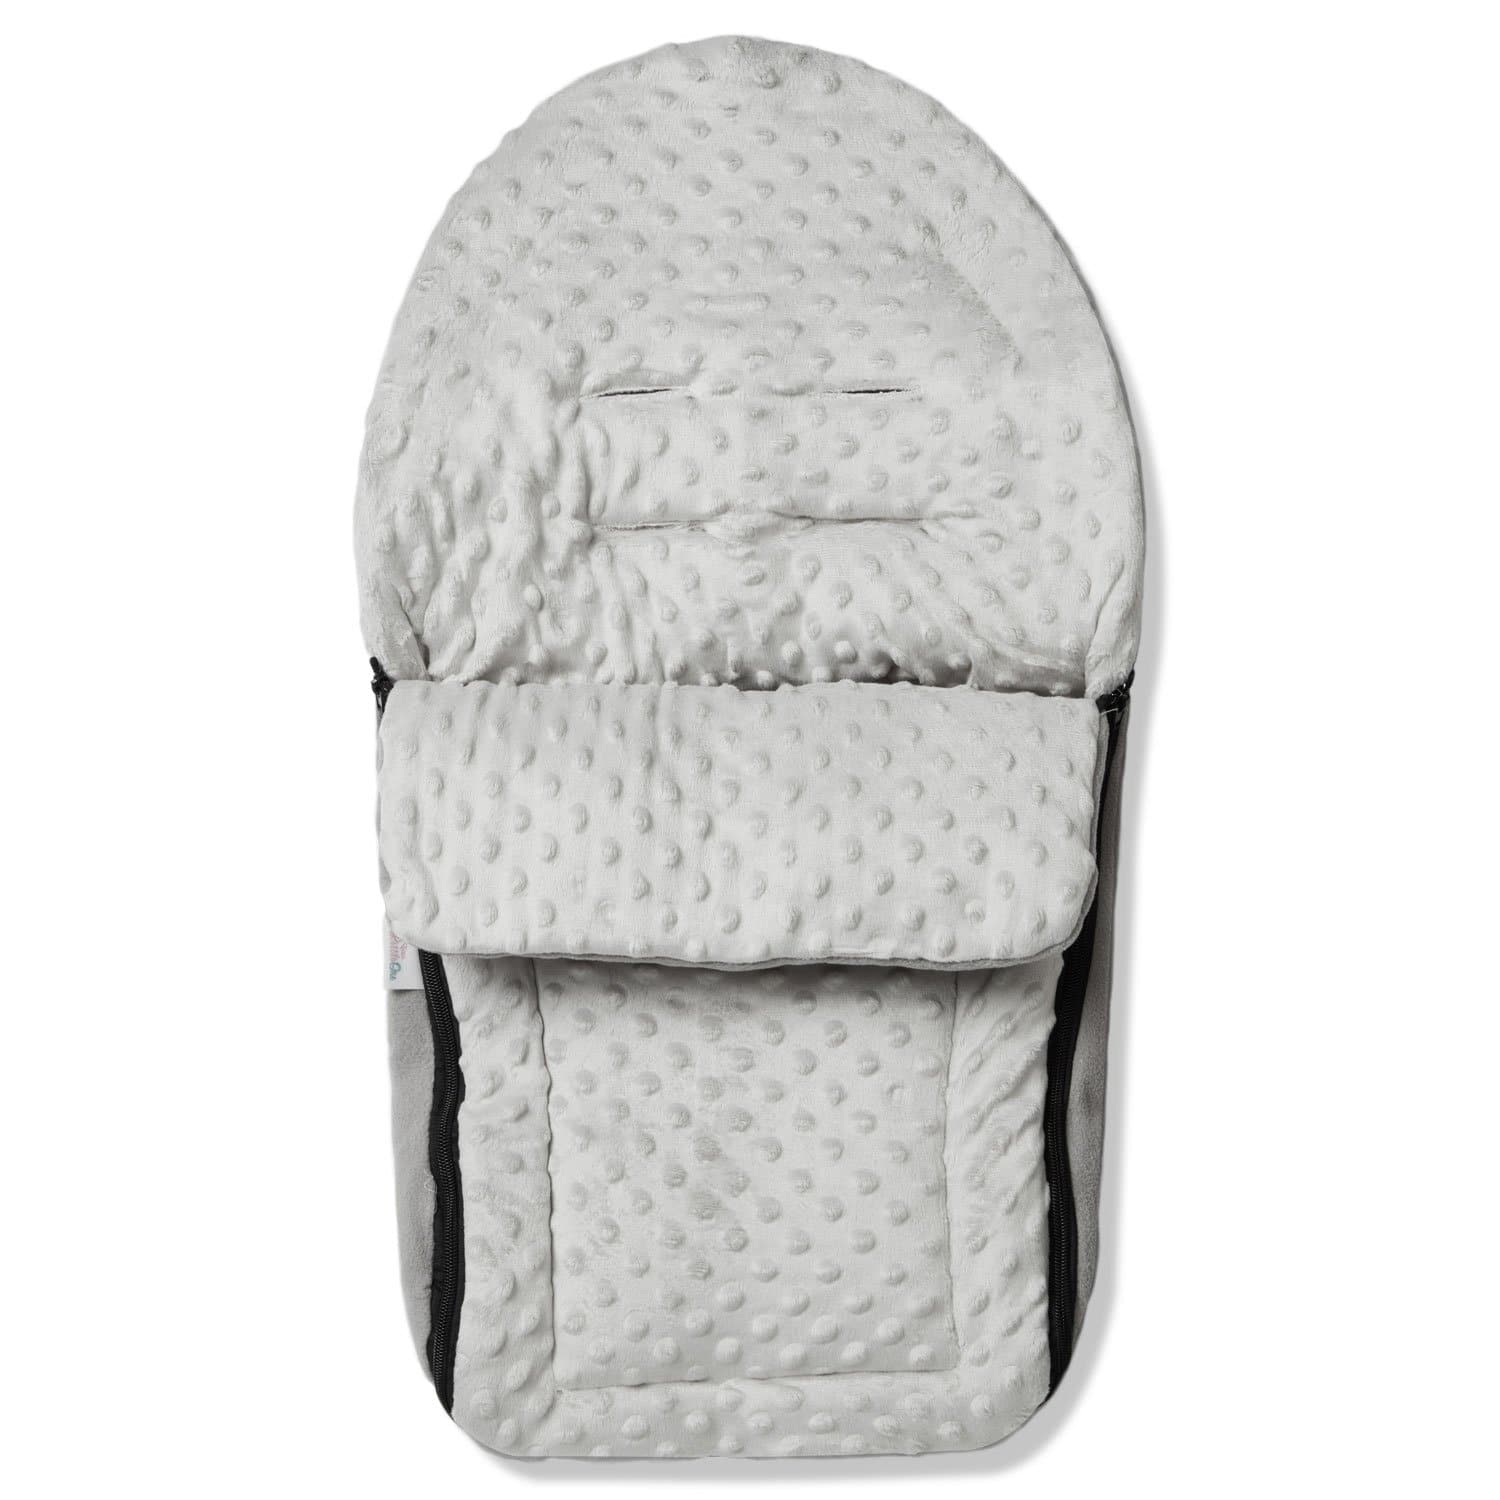 Universal Dimple Car Seat Footmuff / Cosy Toes - Fits All 3 And 5 Point Harnesses - For Your Little One